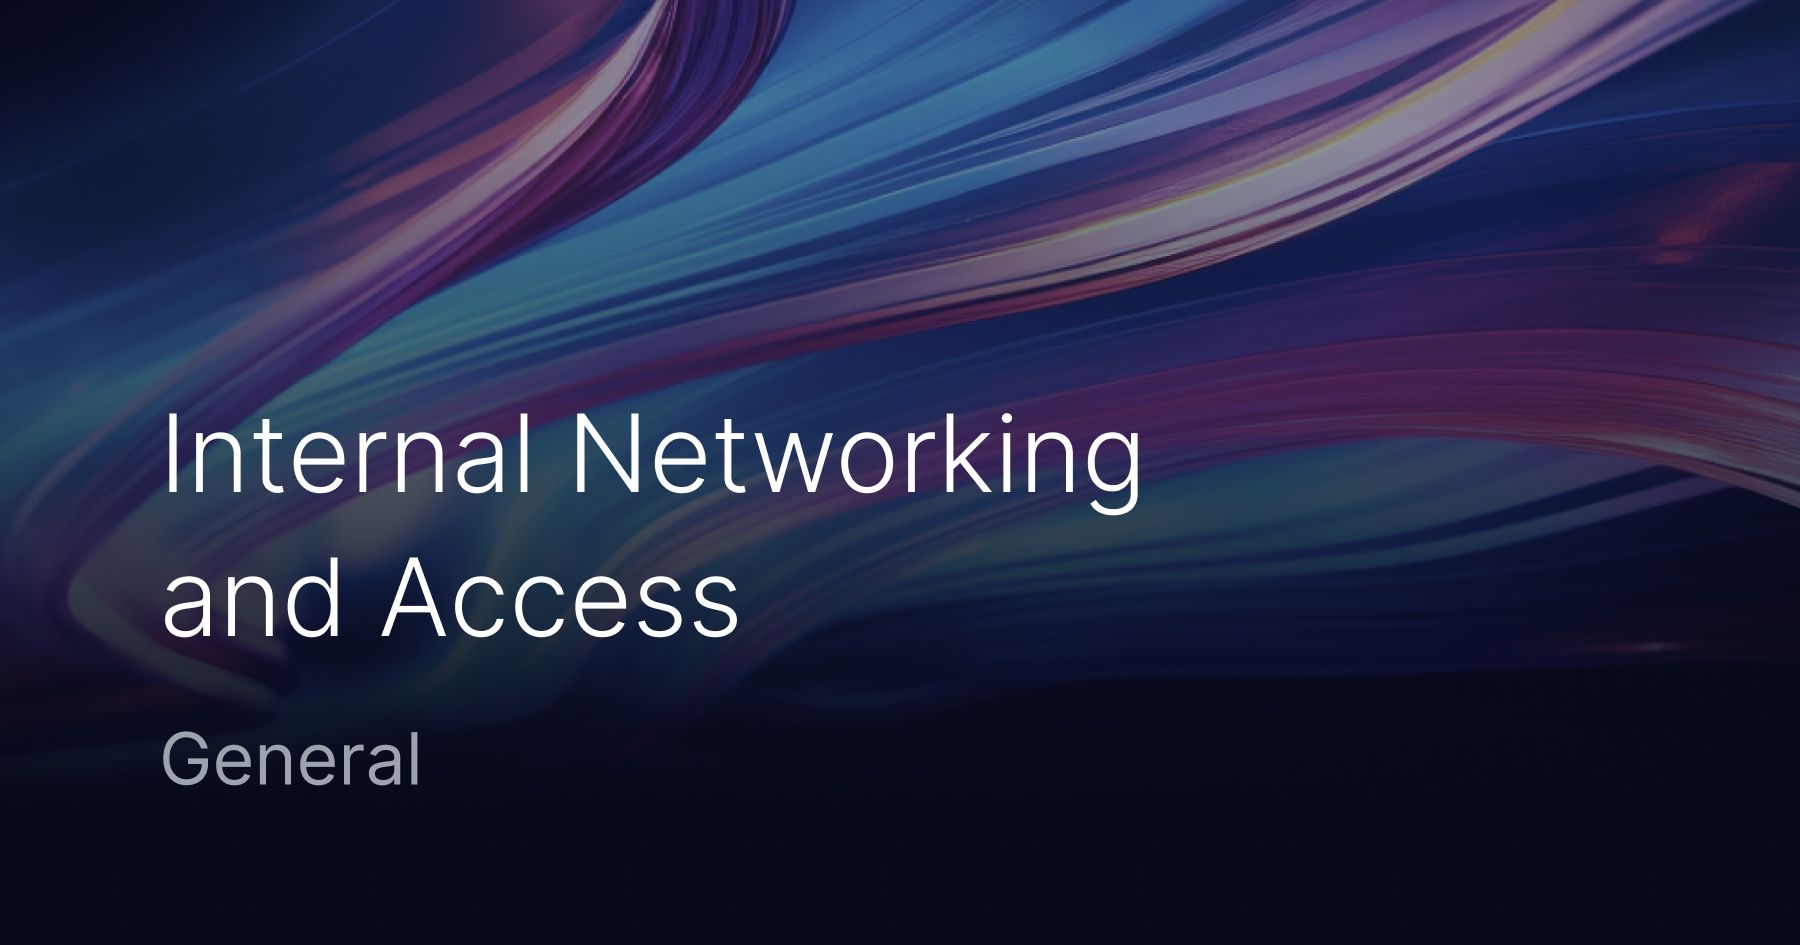 Evolution of Internal Networking and Access